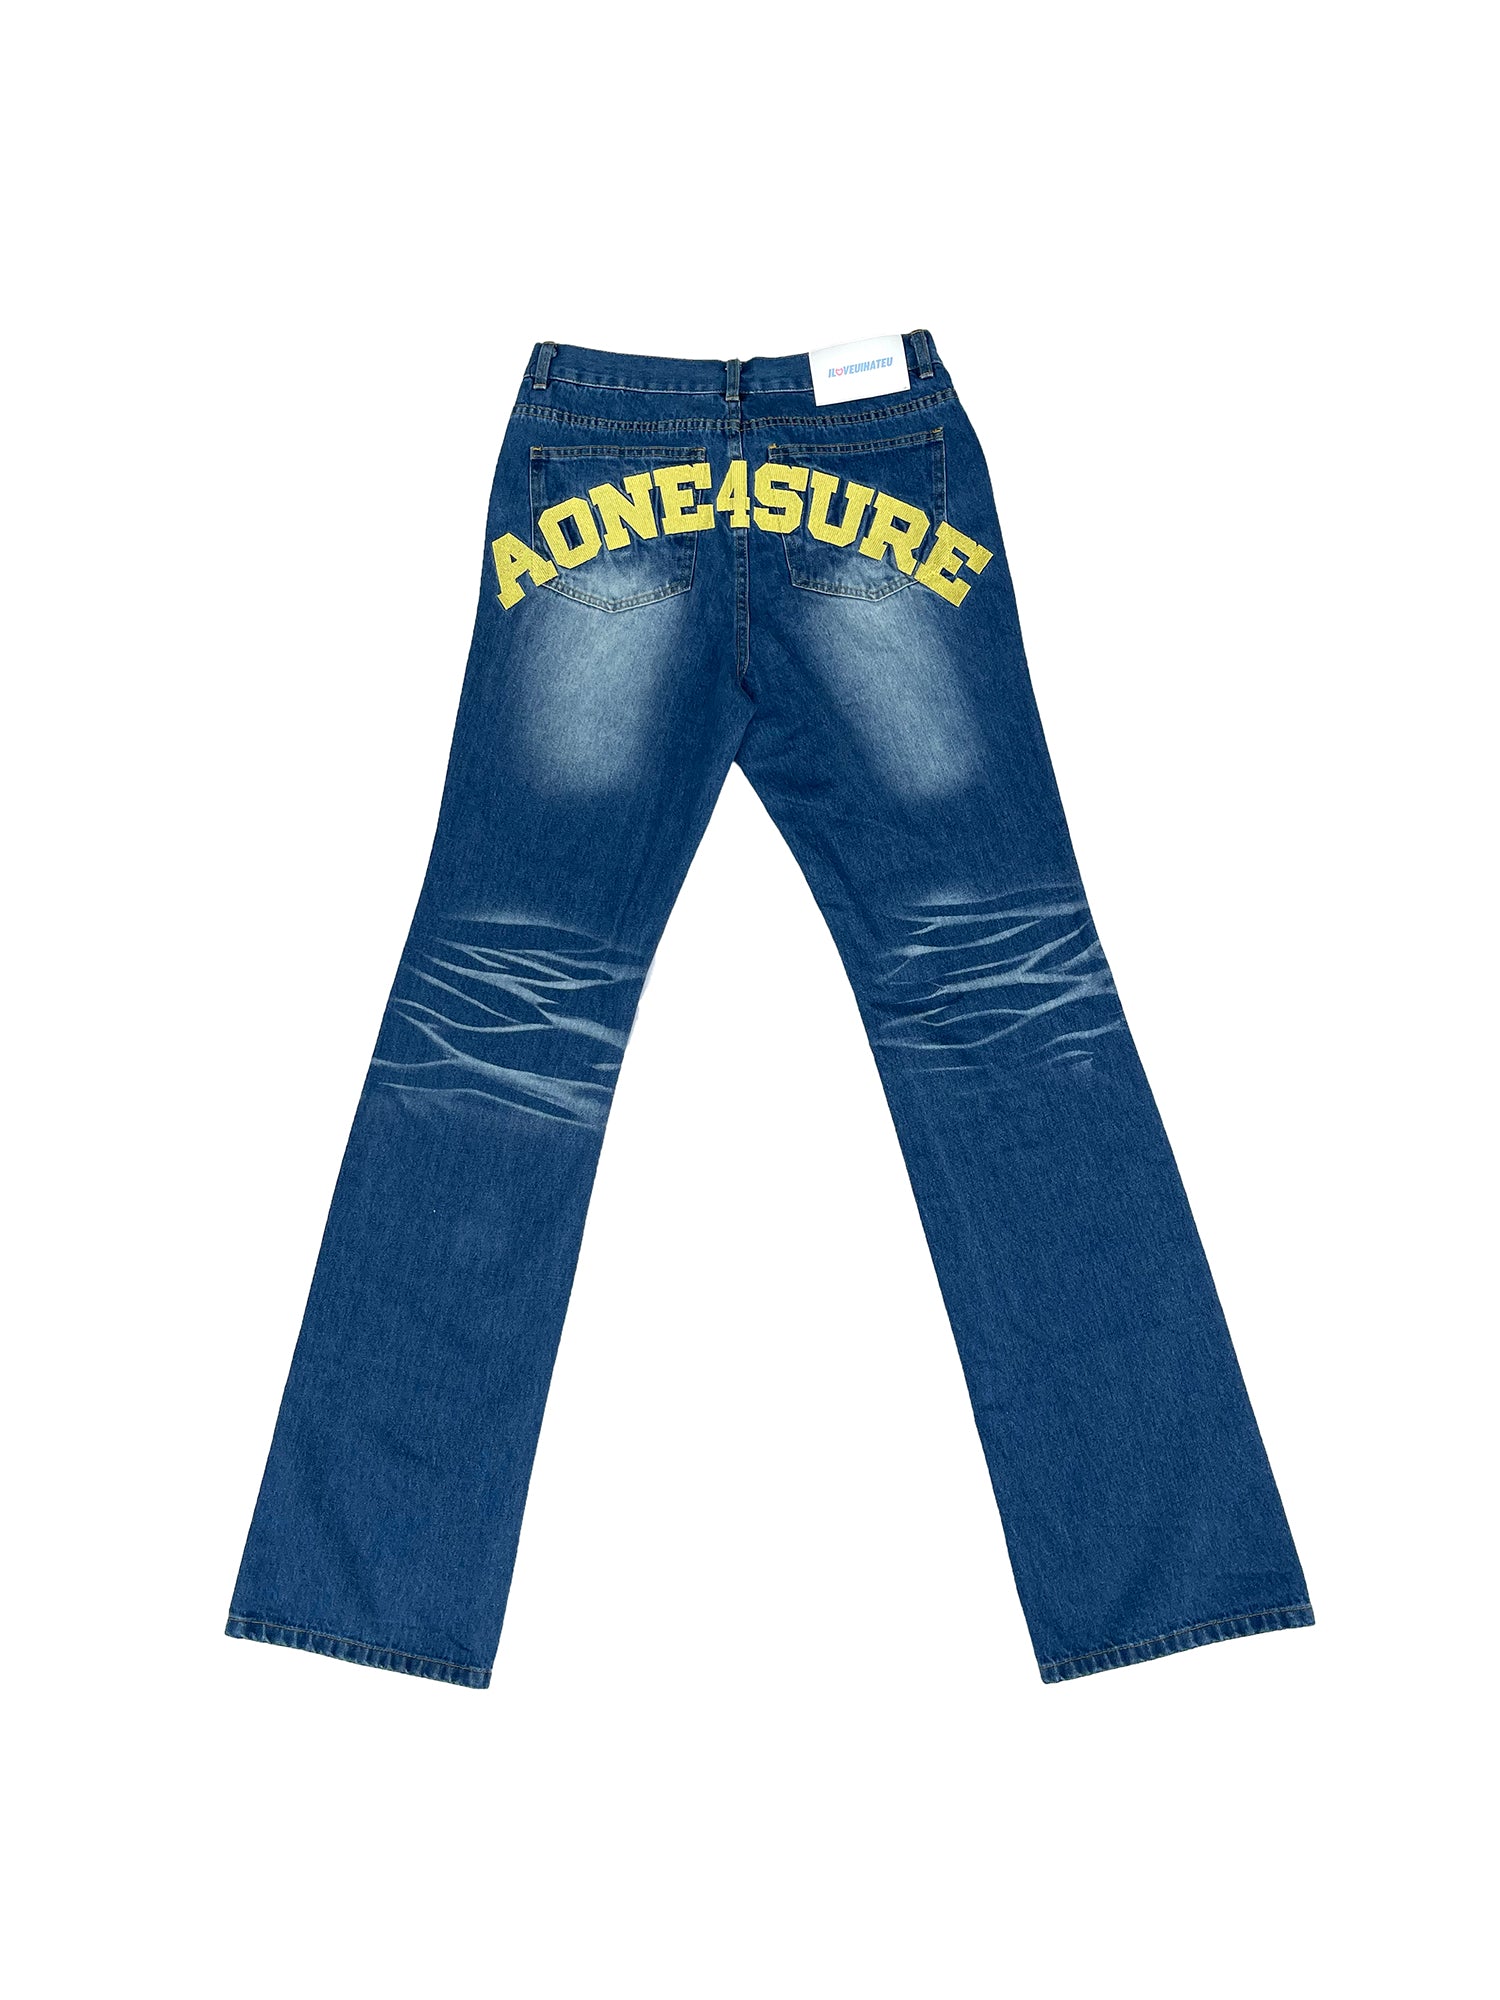 AONE4SURE embroidered yellow logo jeans | kingsvillelawyer.com